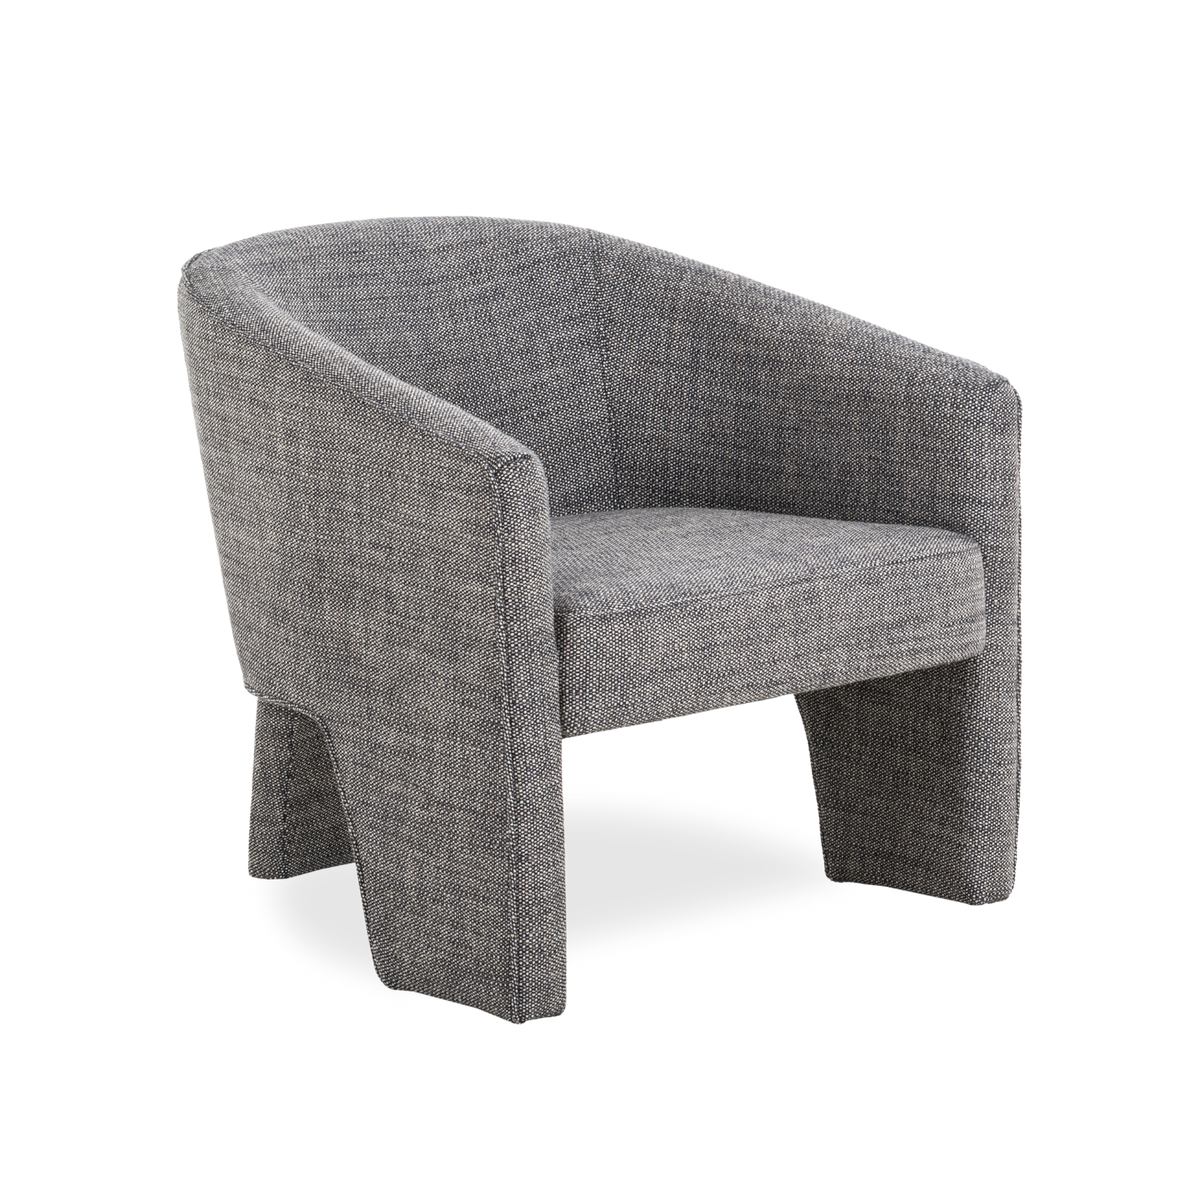 Well-tailored, the Culhane Armchair is stylistically unique.